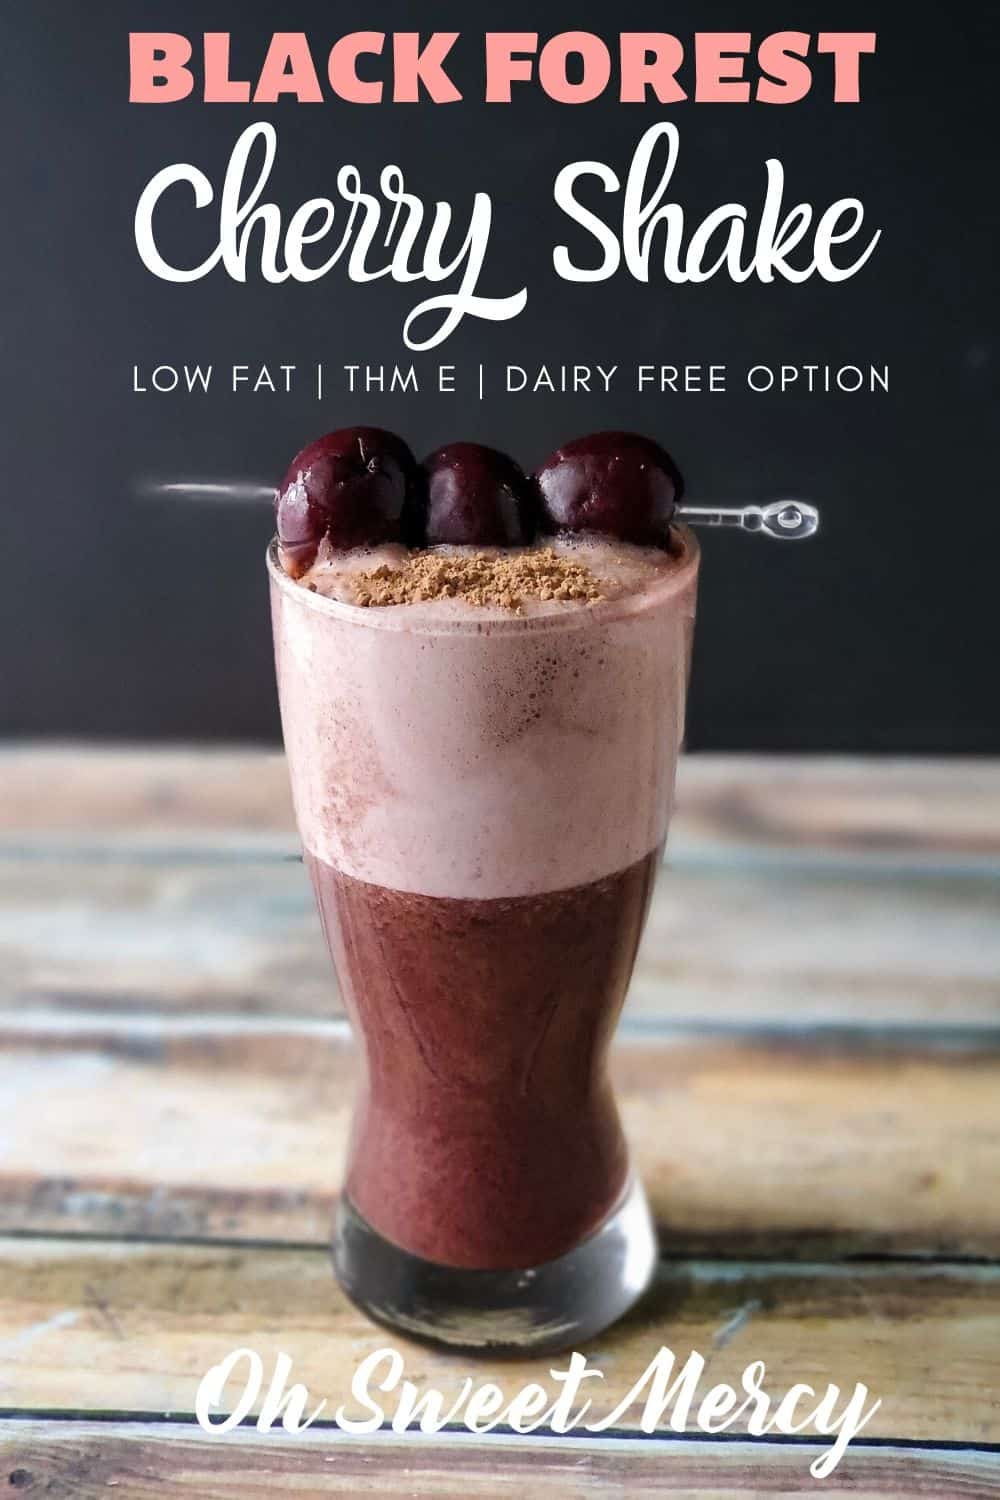 Enjoy my low fat Black Forest Cherry Shake for all the yummy flavors of chocolate and cherry but not all the fat and sugar. Healthy carb, THM E friendly, dairy free and vegan options. #lowfat #blackforestcherry #shakes #thmshakes #thm